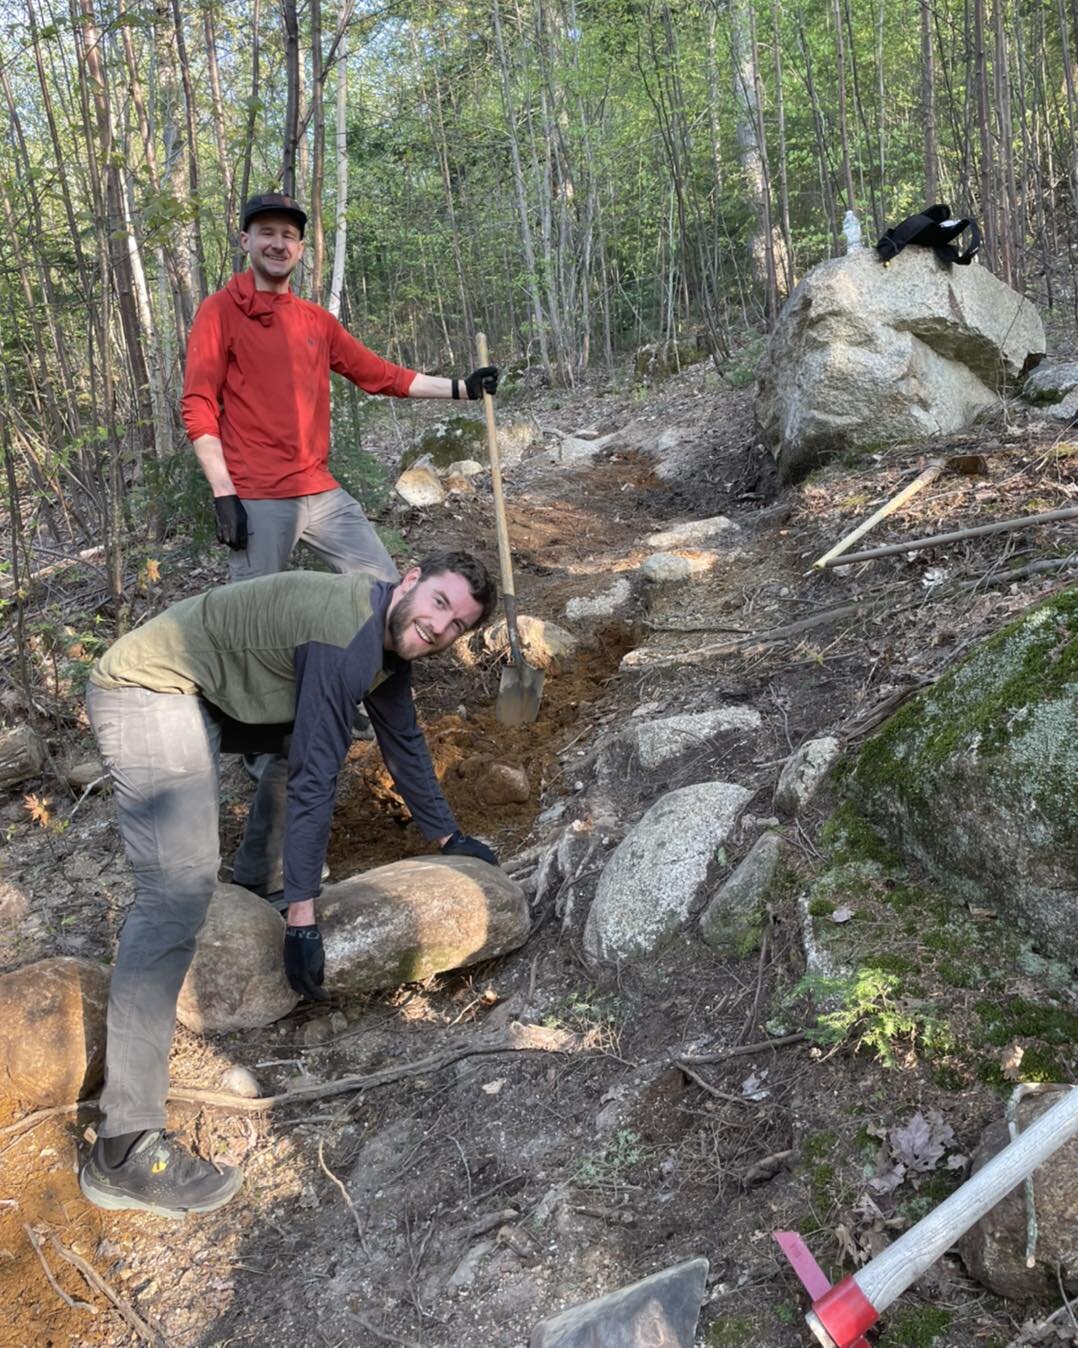 Exciting News!!! Digging and riding this weekend! 

Thanks to a great showing of volunteers a portion of the Hurricane network is nearly ready for riders. With volunteer help this Saturday 5/13 we hope to open Hurricane Highway, Kettle Ridge, Tornado